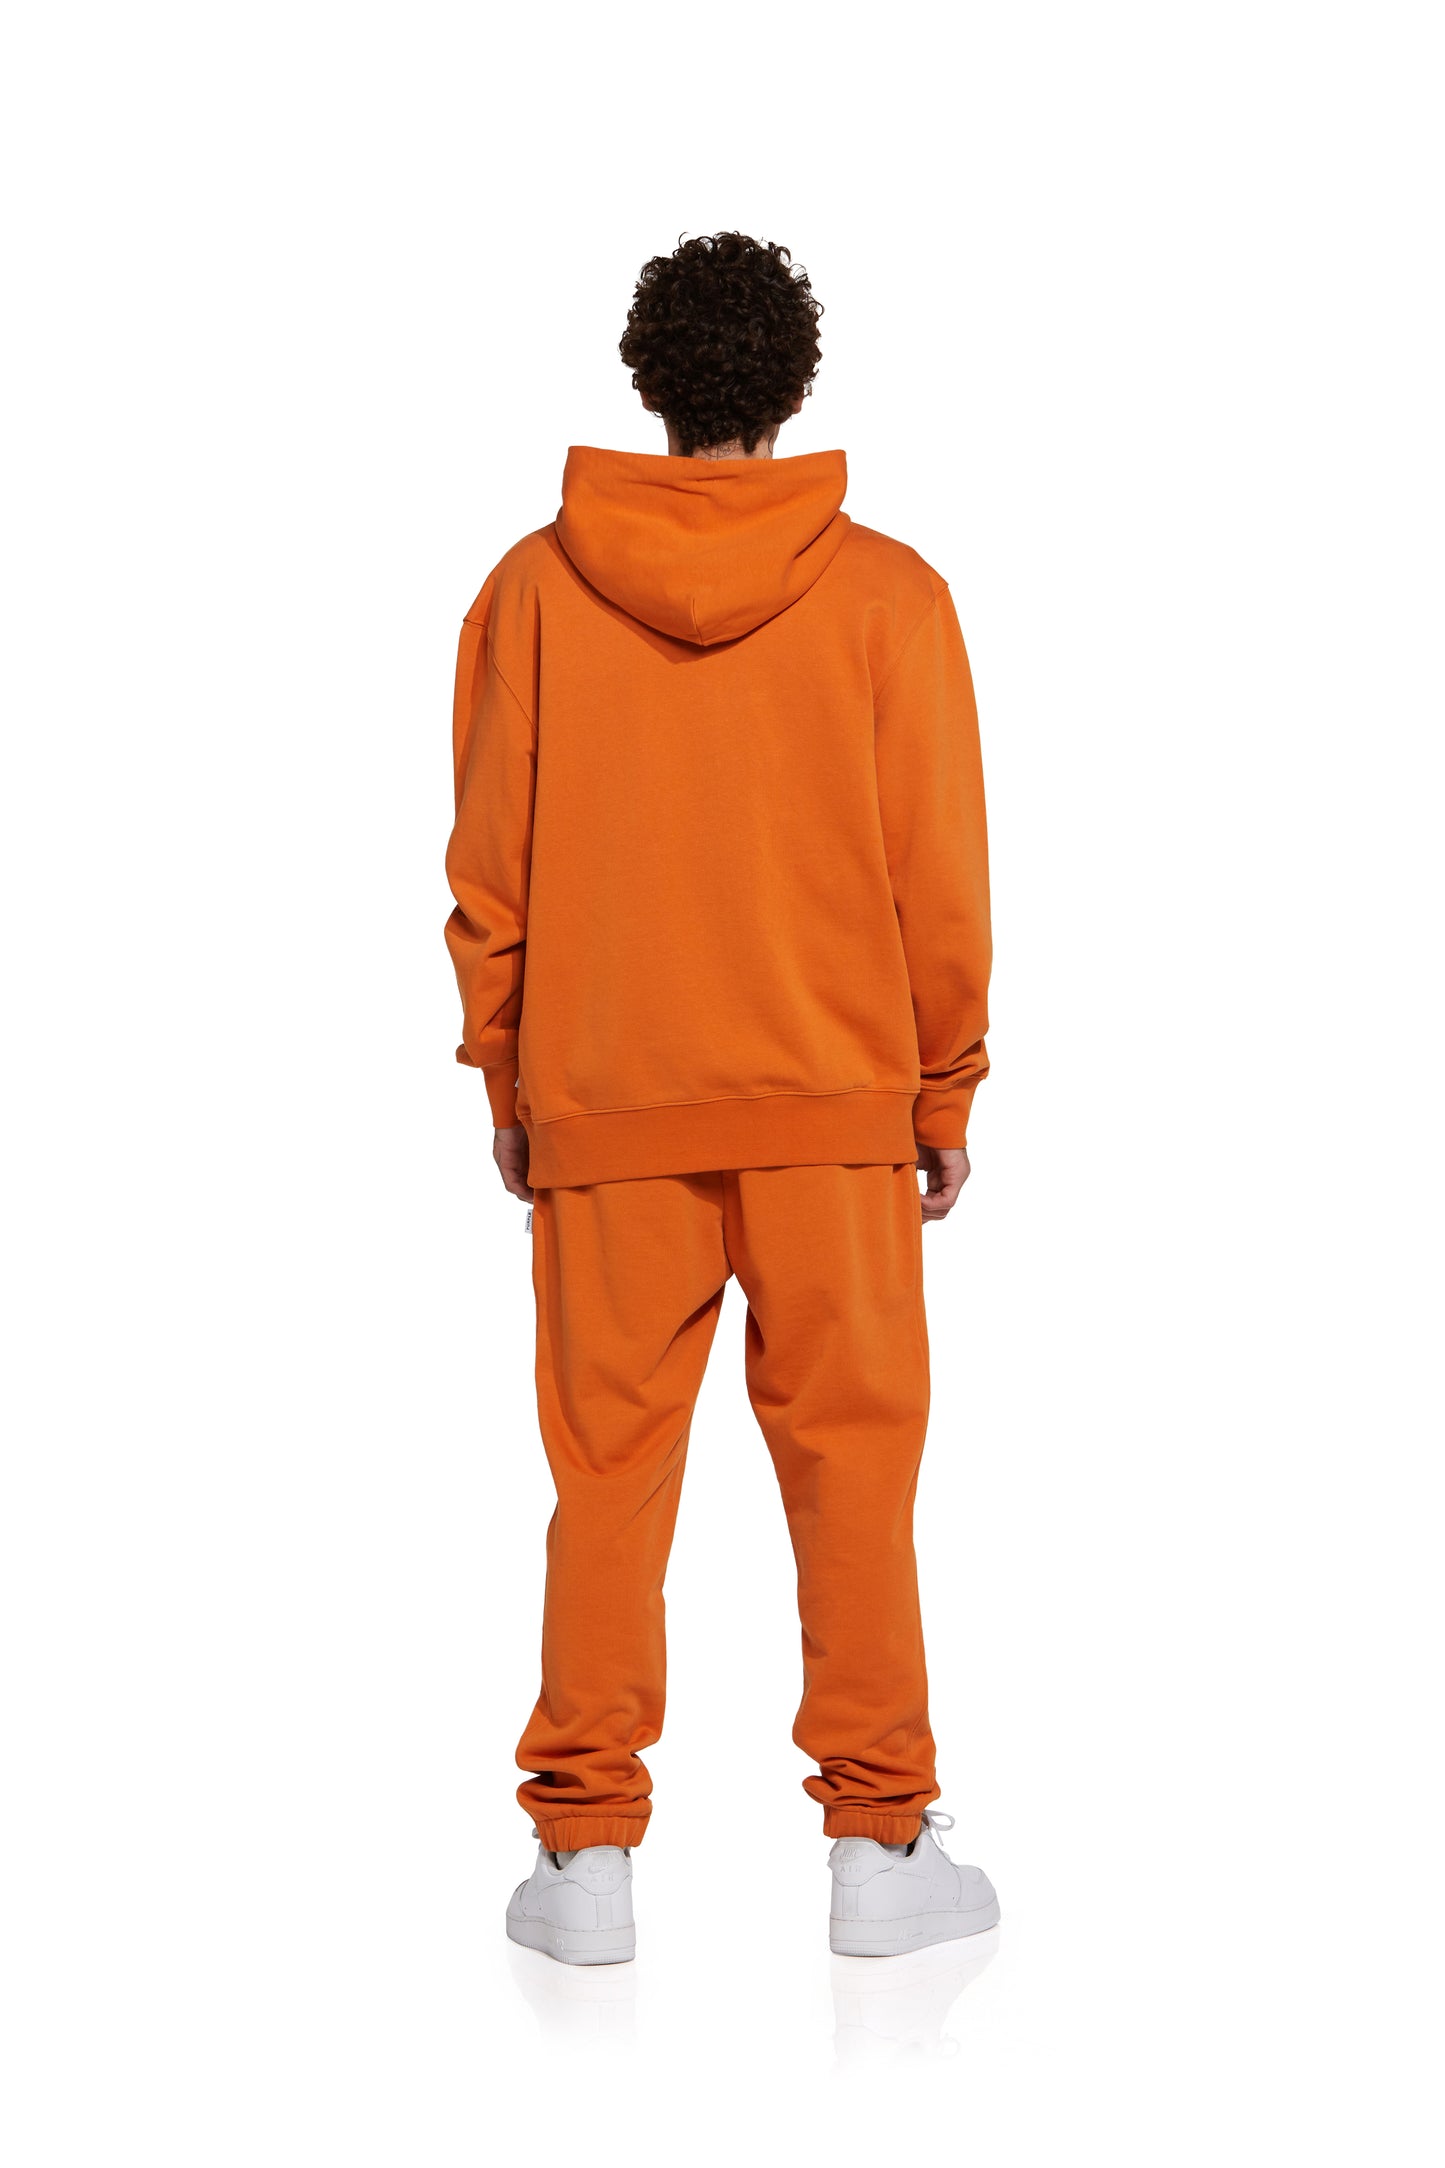 P410 REGULAR FIT HOODIE - Gothic Arch Marmalade